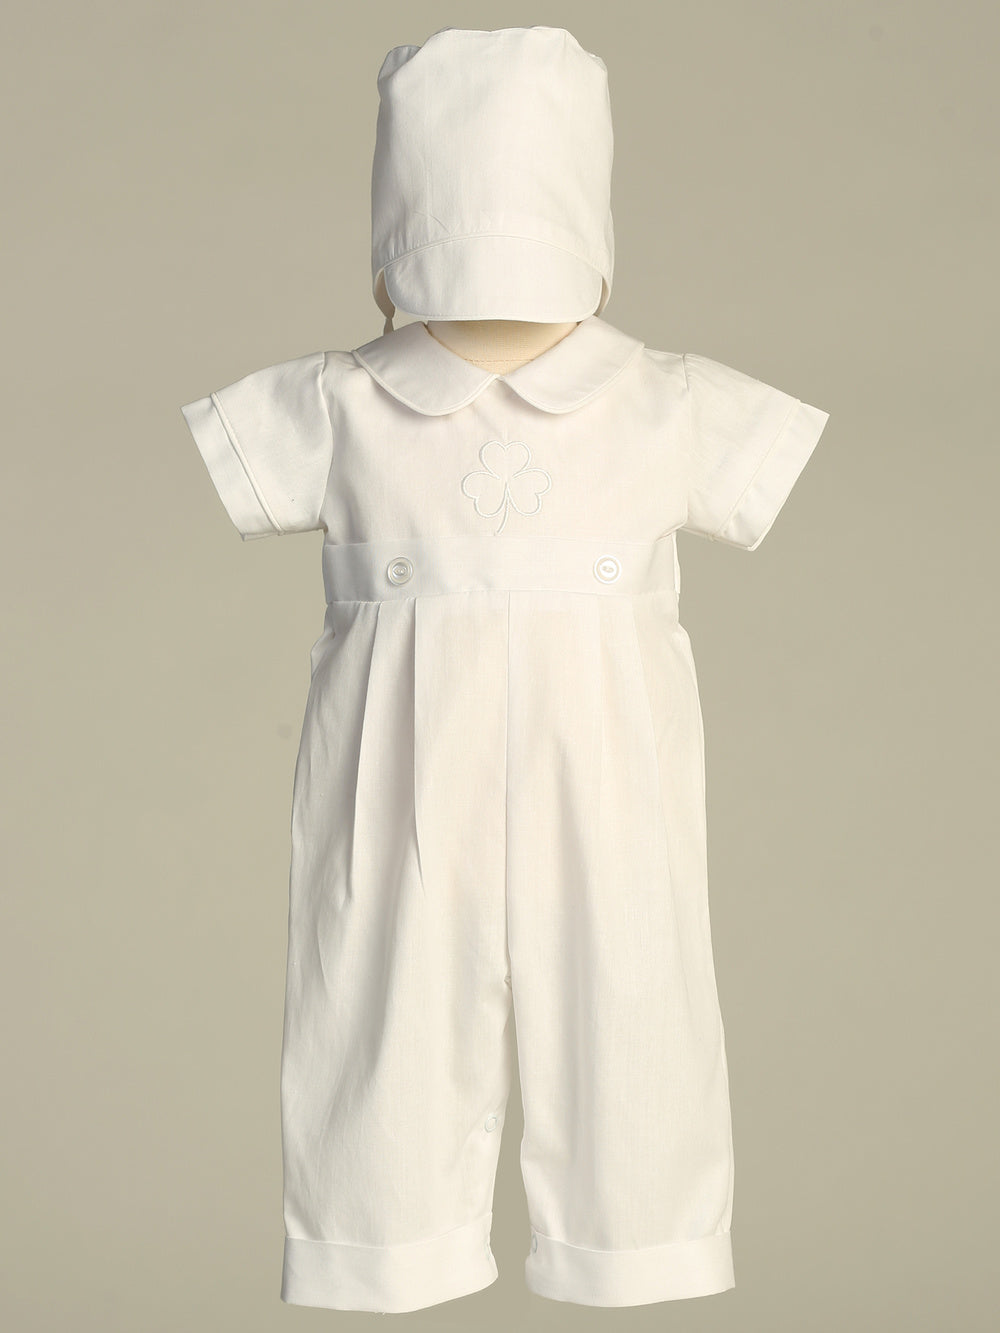 Patrick Baptism Outfit